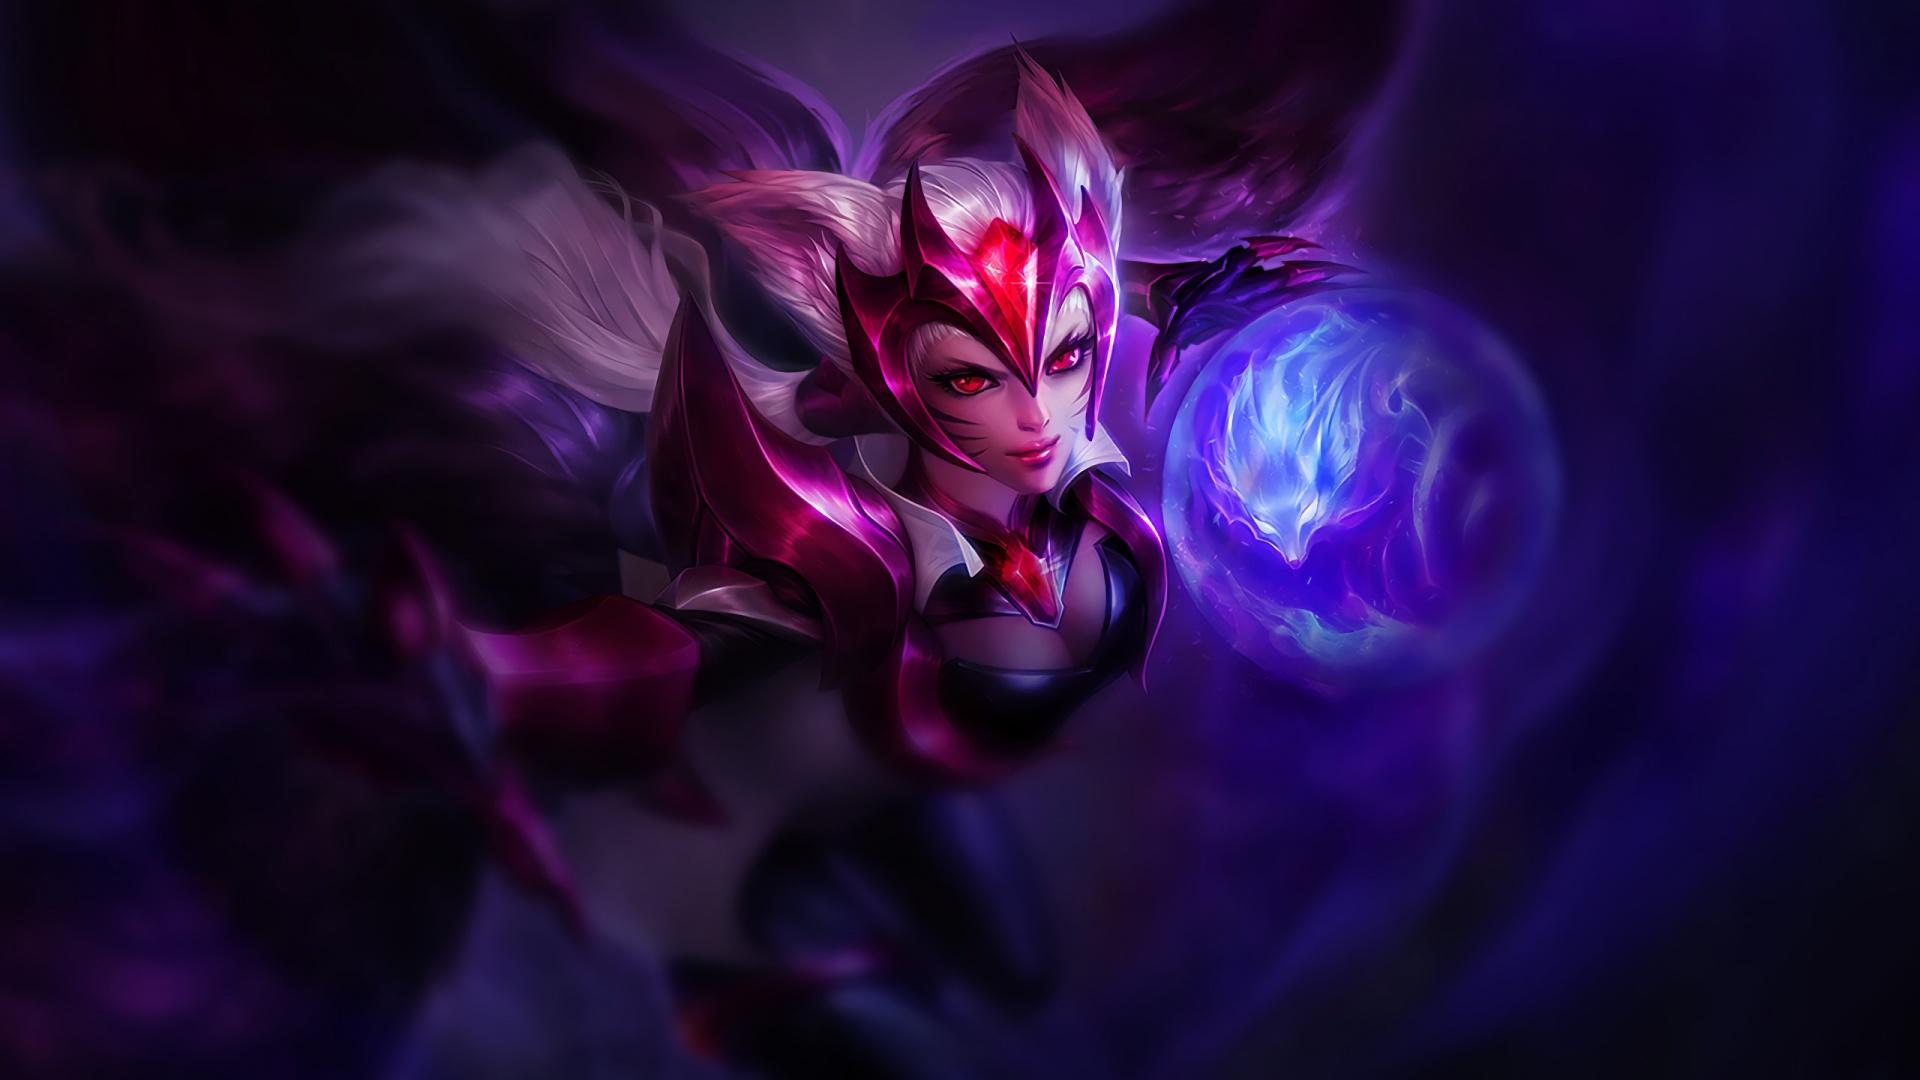 Ahri League of Legends Wallpaper in jpg format for free download